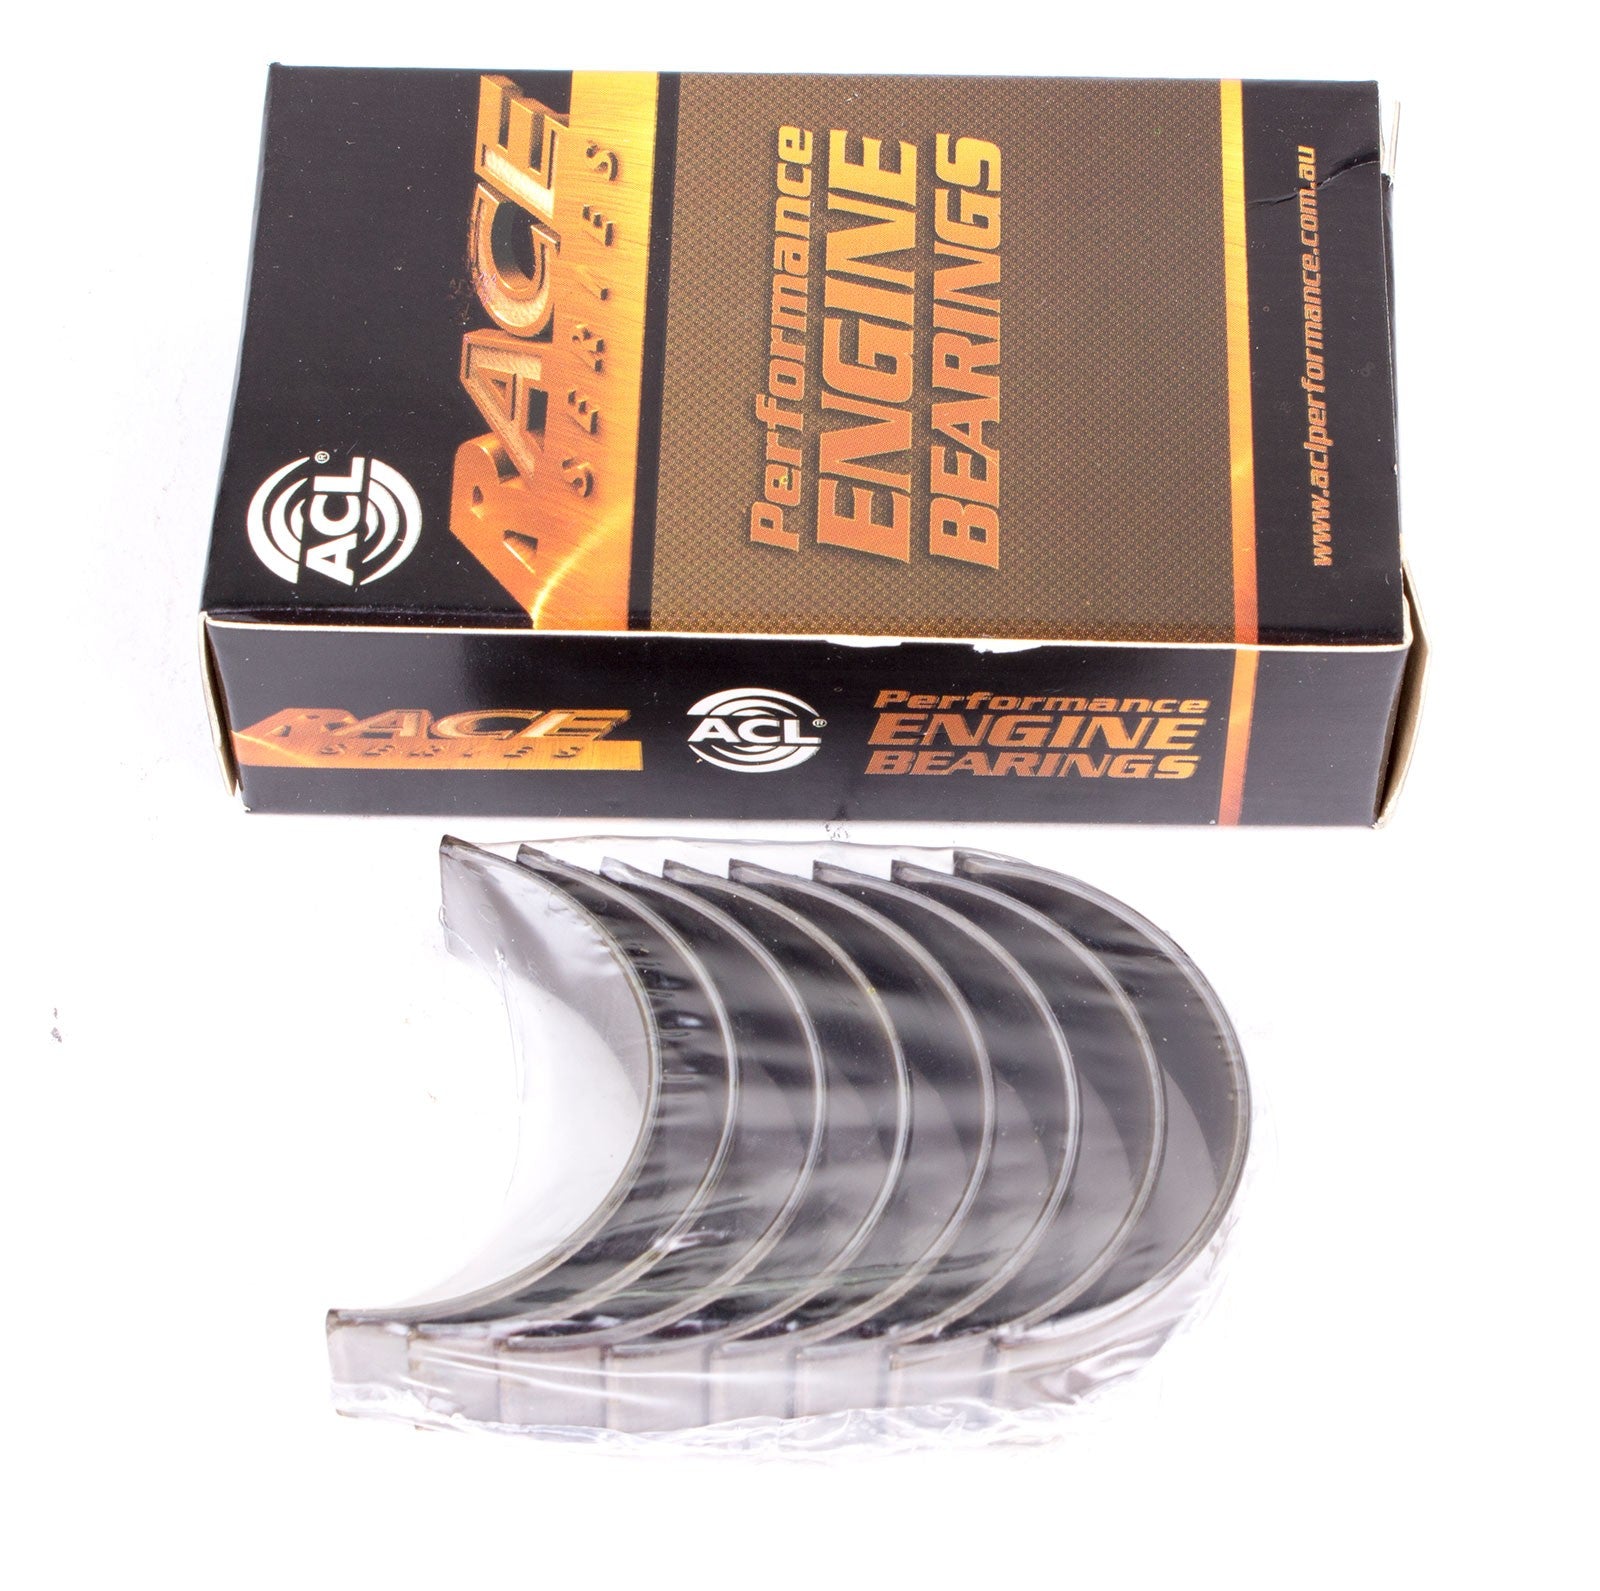 ACL 5M7298H-10 Main bearing set (ACL Race Series) Photo-0 